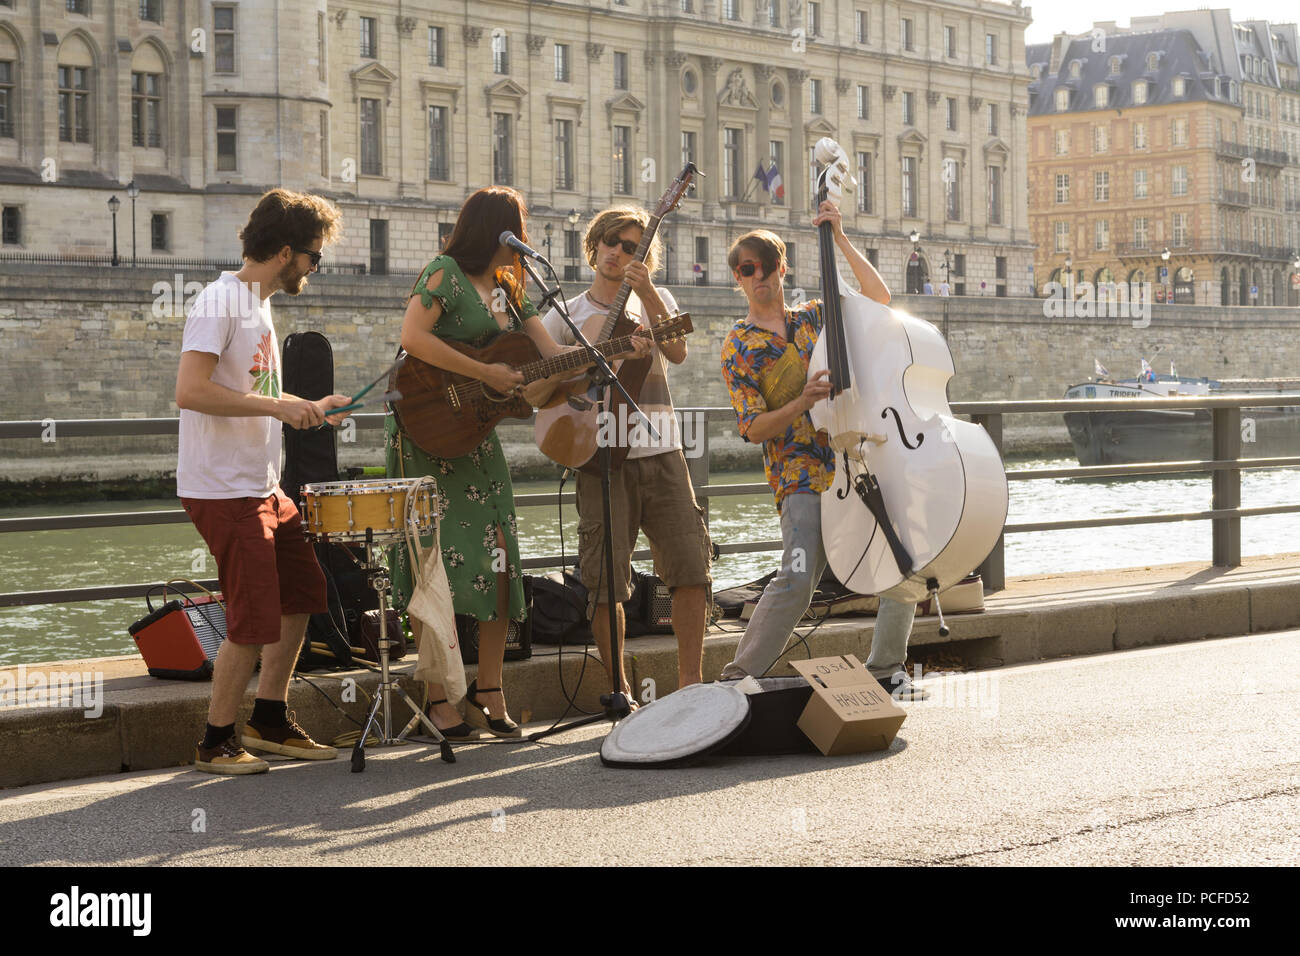 Street music band with double bass Paris - Street musicians playing at the embankment of the Seine River in Paris, France, Europe. Stock Photo